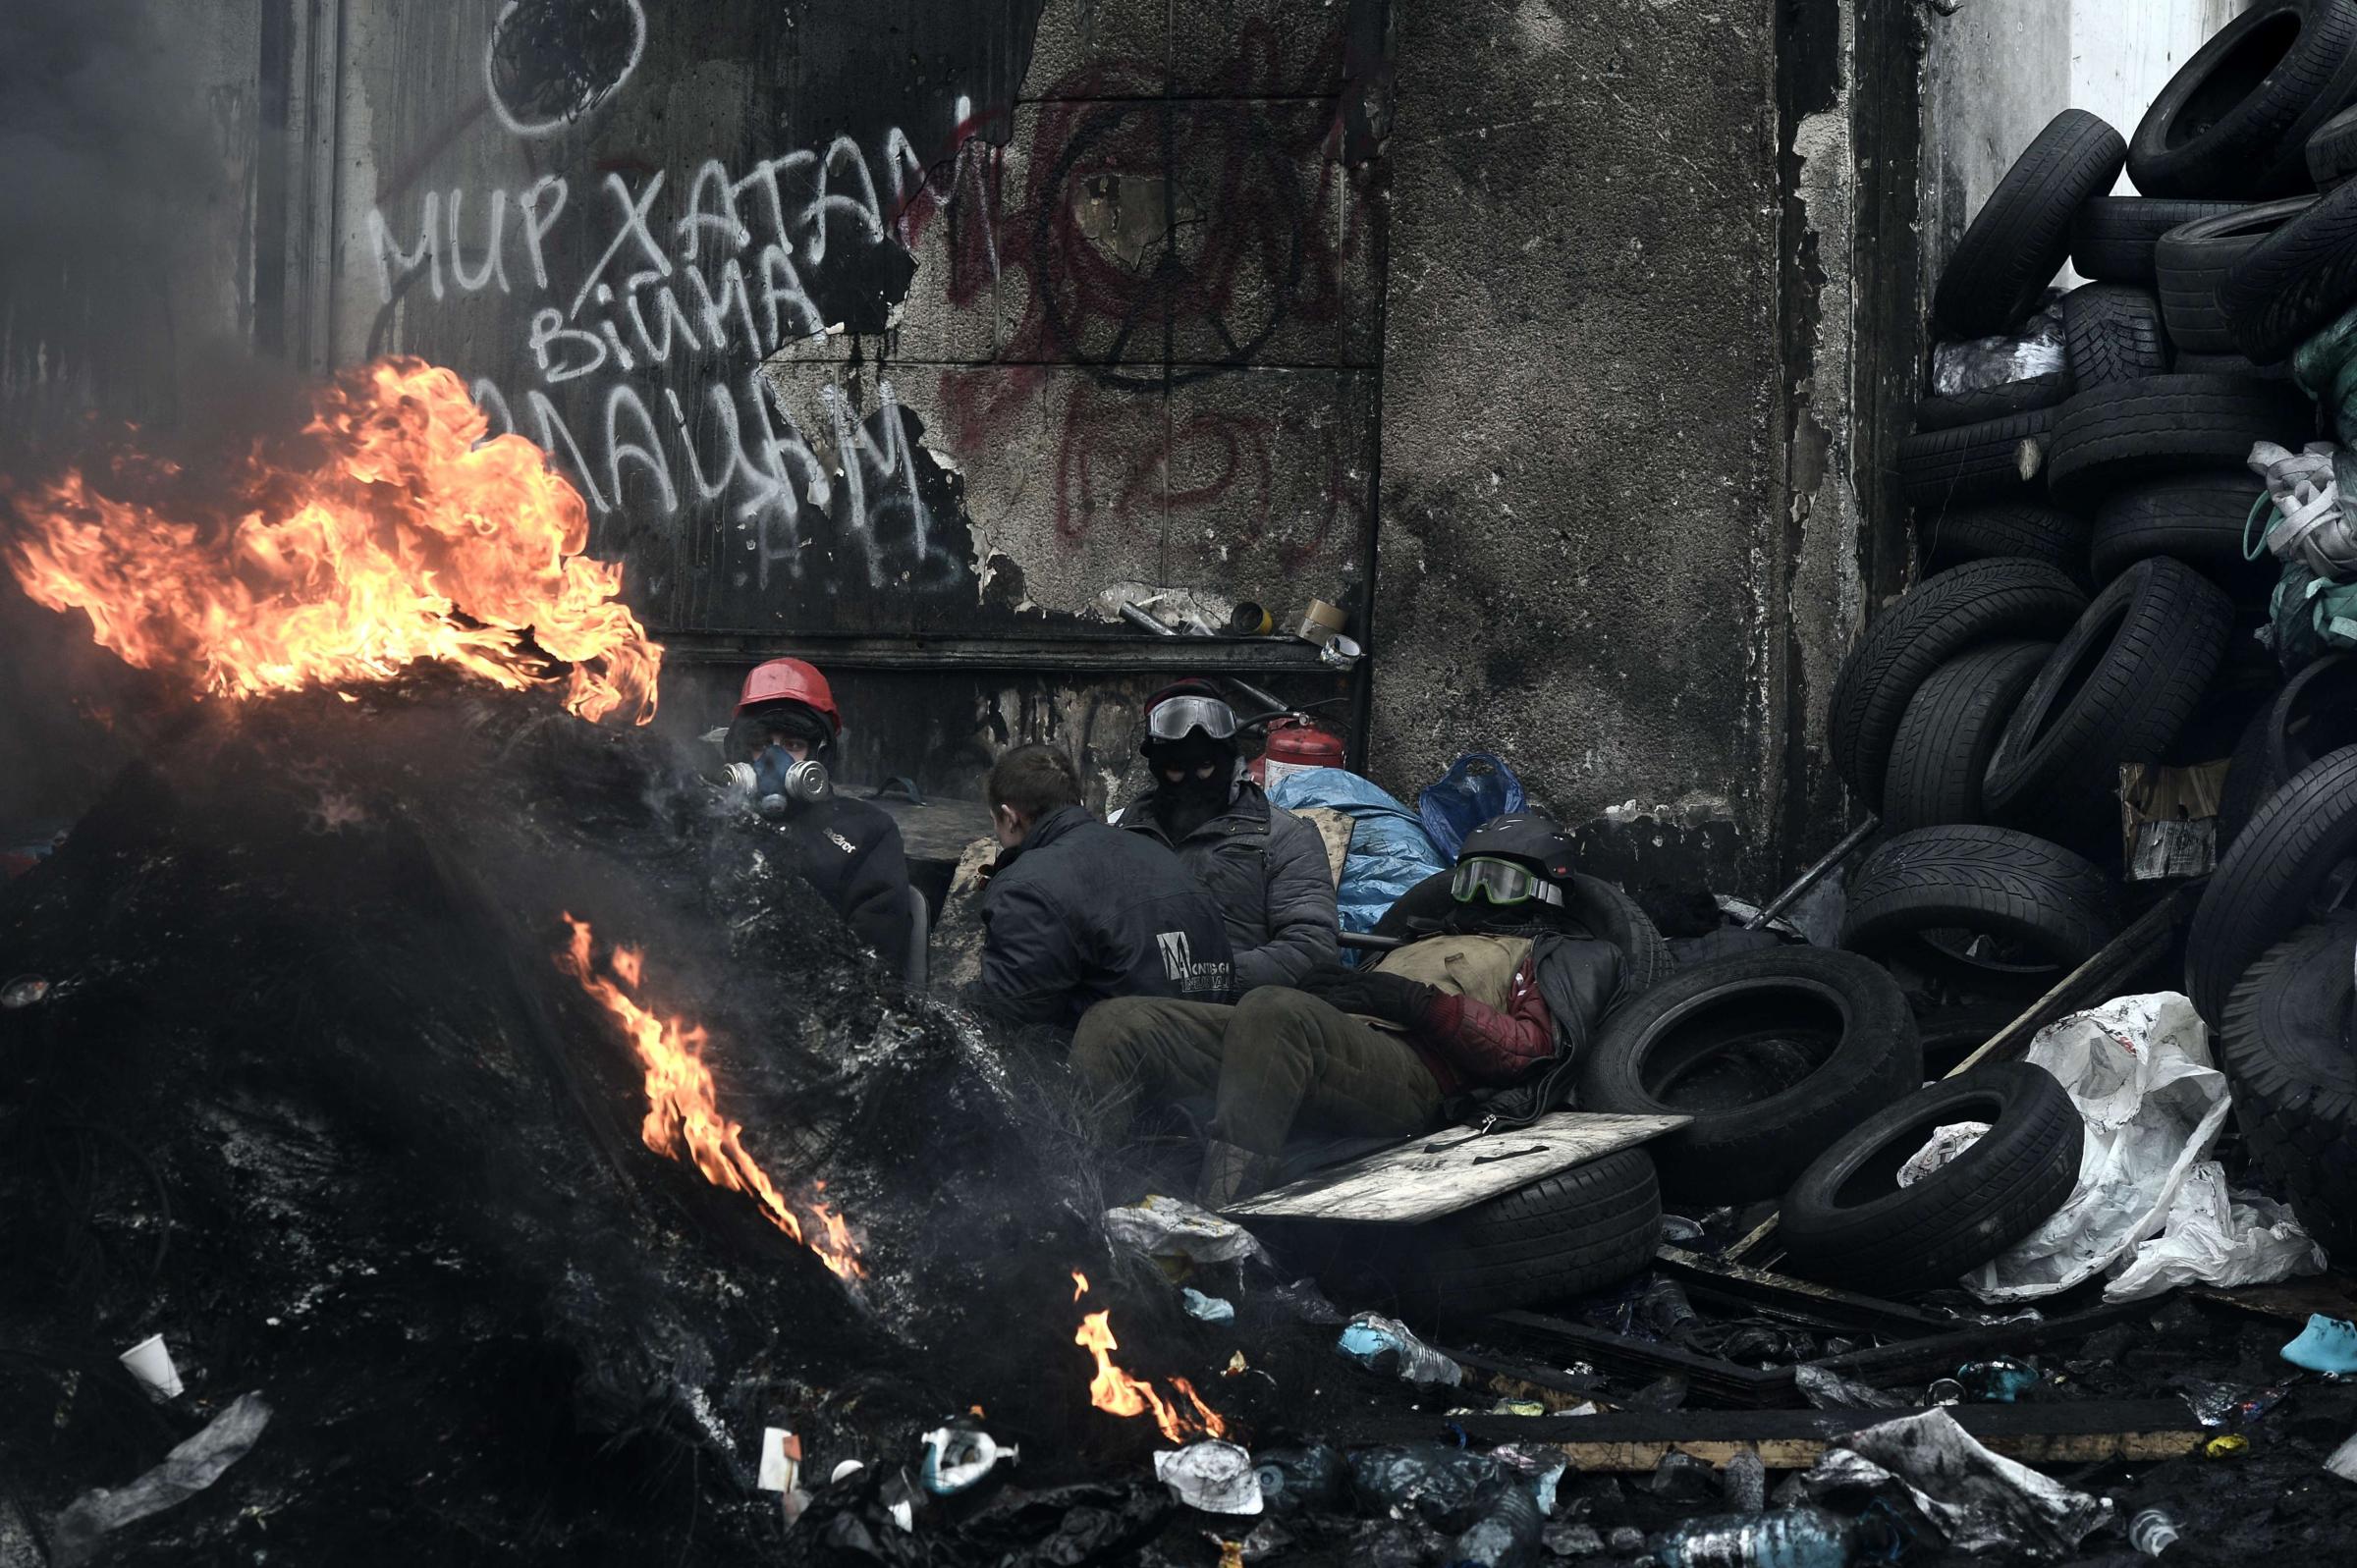 A anti-government protesters rest near a fire next to a road block in Kiev on Jan. 28, 2014.